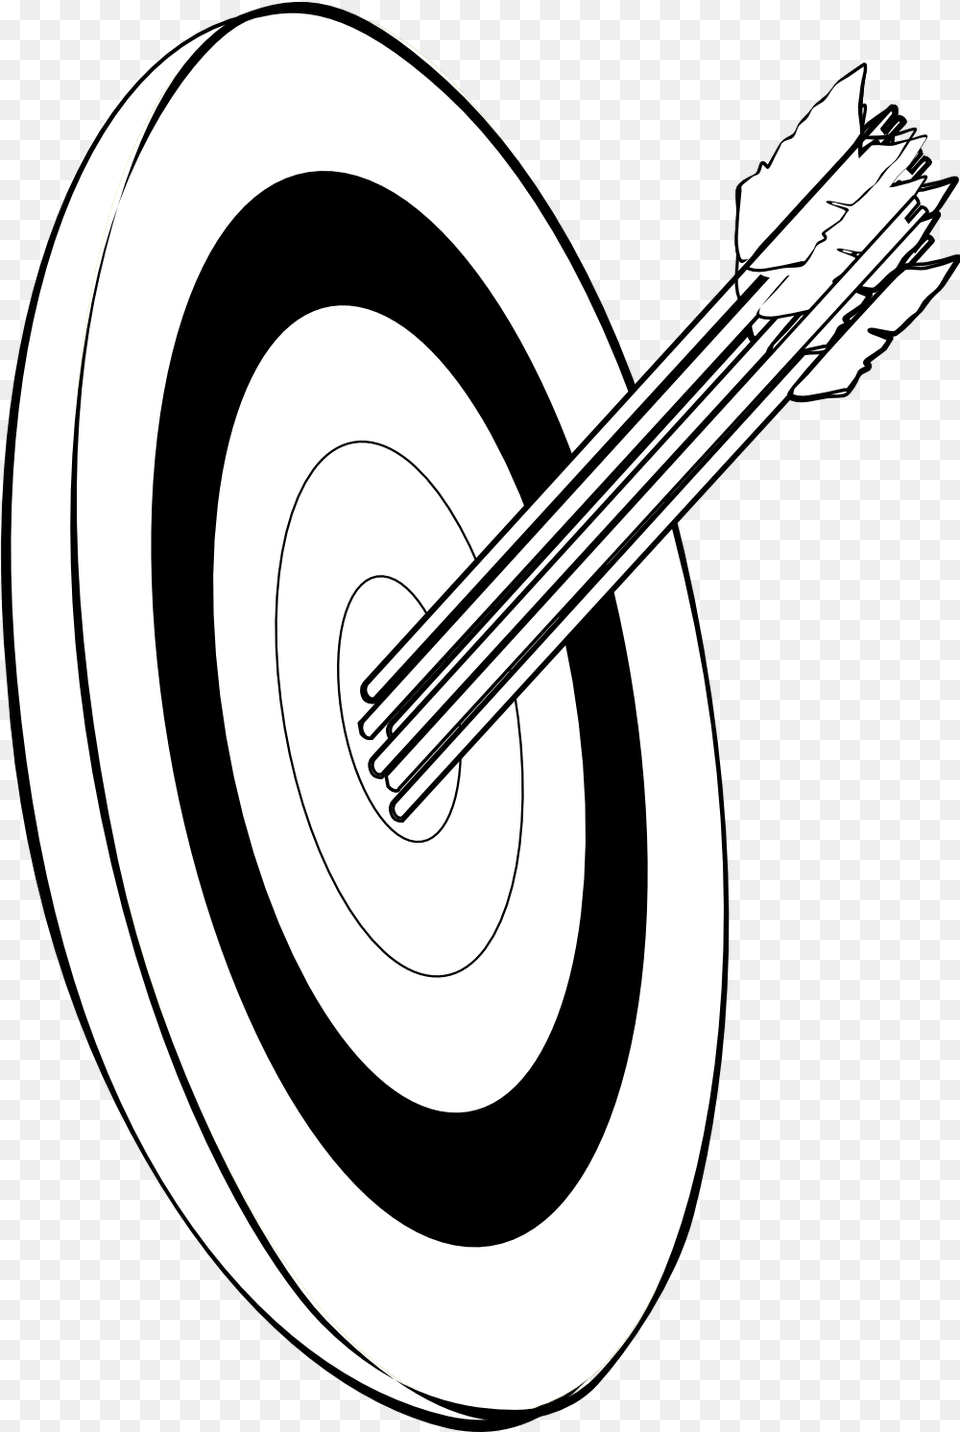 Arrows And Target Snarkhunter In The Gold Black And White Archery Clip Art, Weapon, Arrow Png